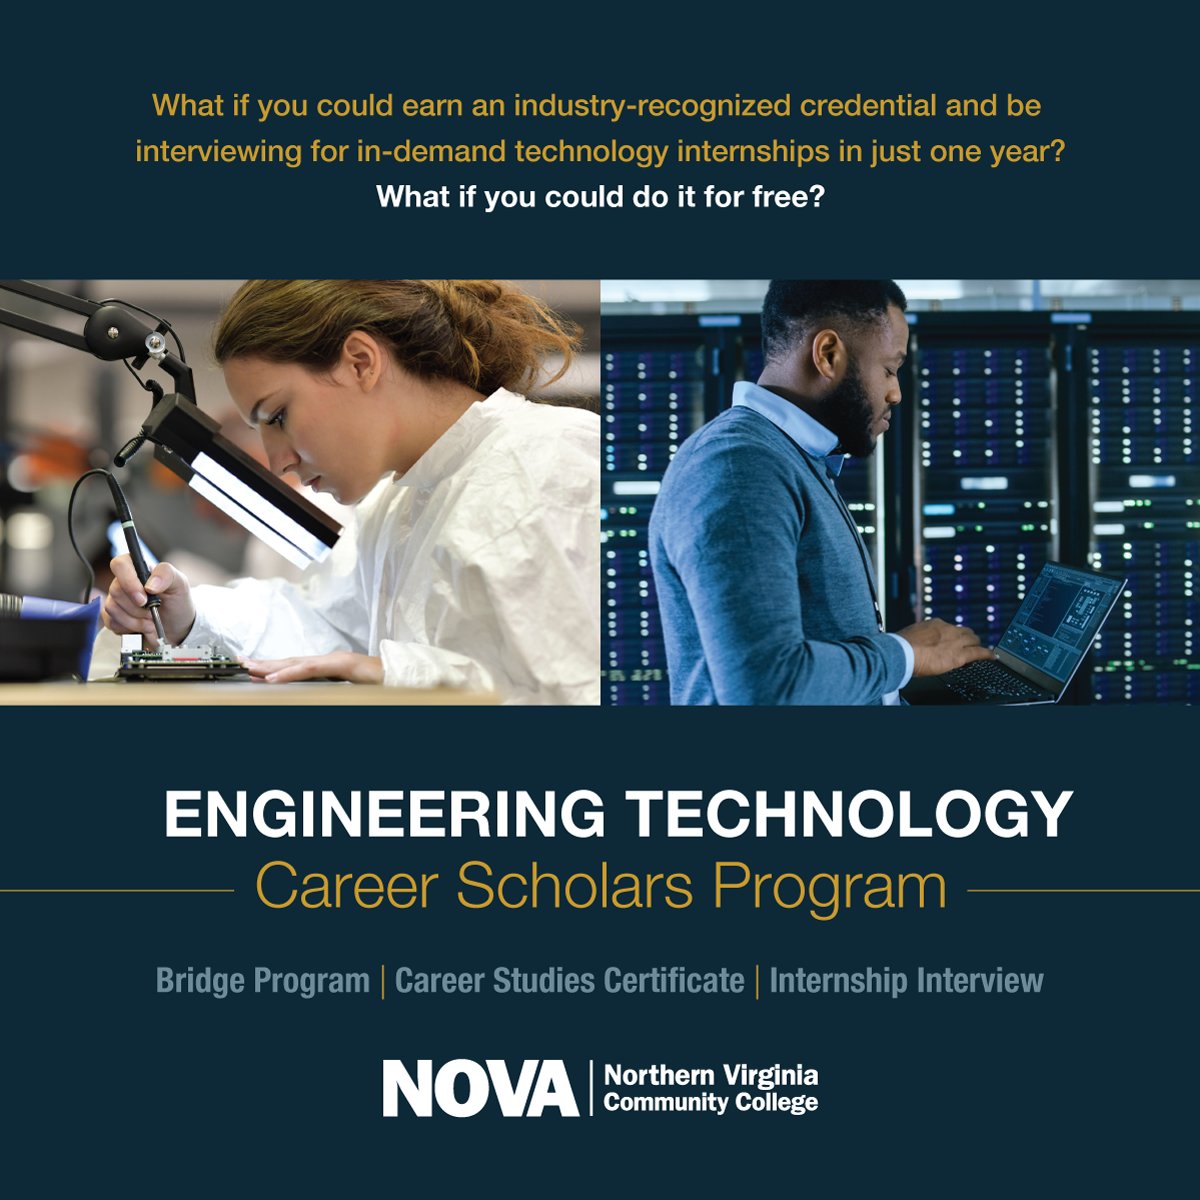 HUGE opportunity for graduating HS seniors, and non-traditional first-time college students looking to start a career in Engineering Tech or Data Center Ops. @NOVAcommcollege is offering a FULL 1-YEAR credential-earning program for FREE! Apply by May 7 at iet.novastem.us/ETCareerScholar